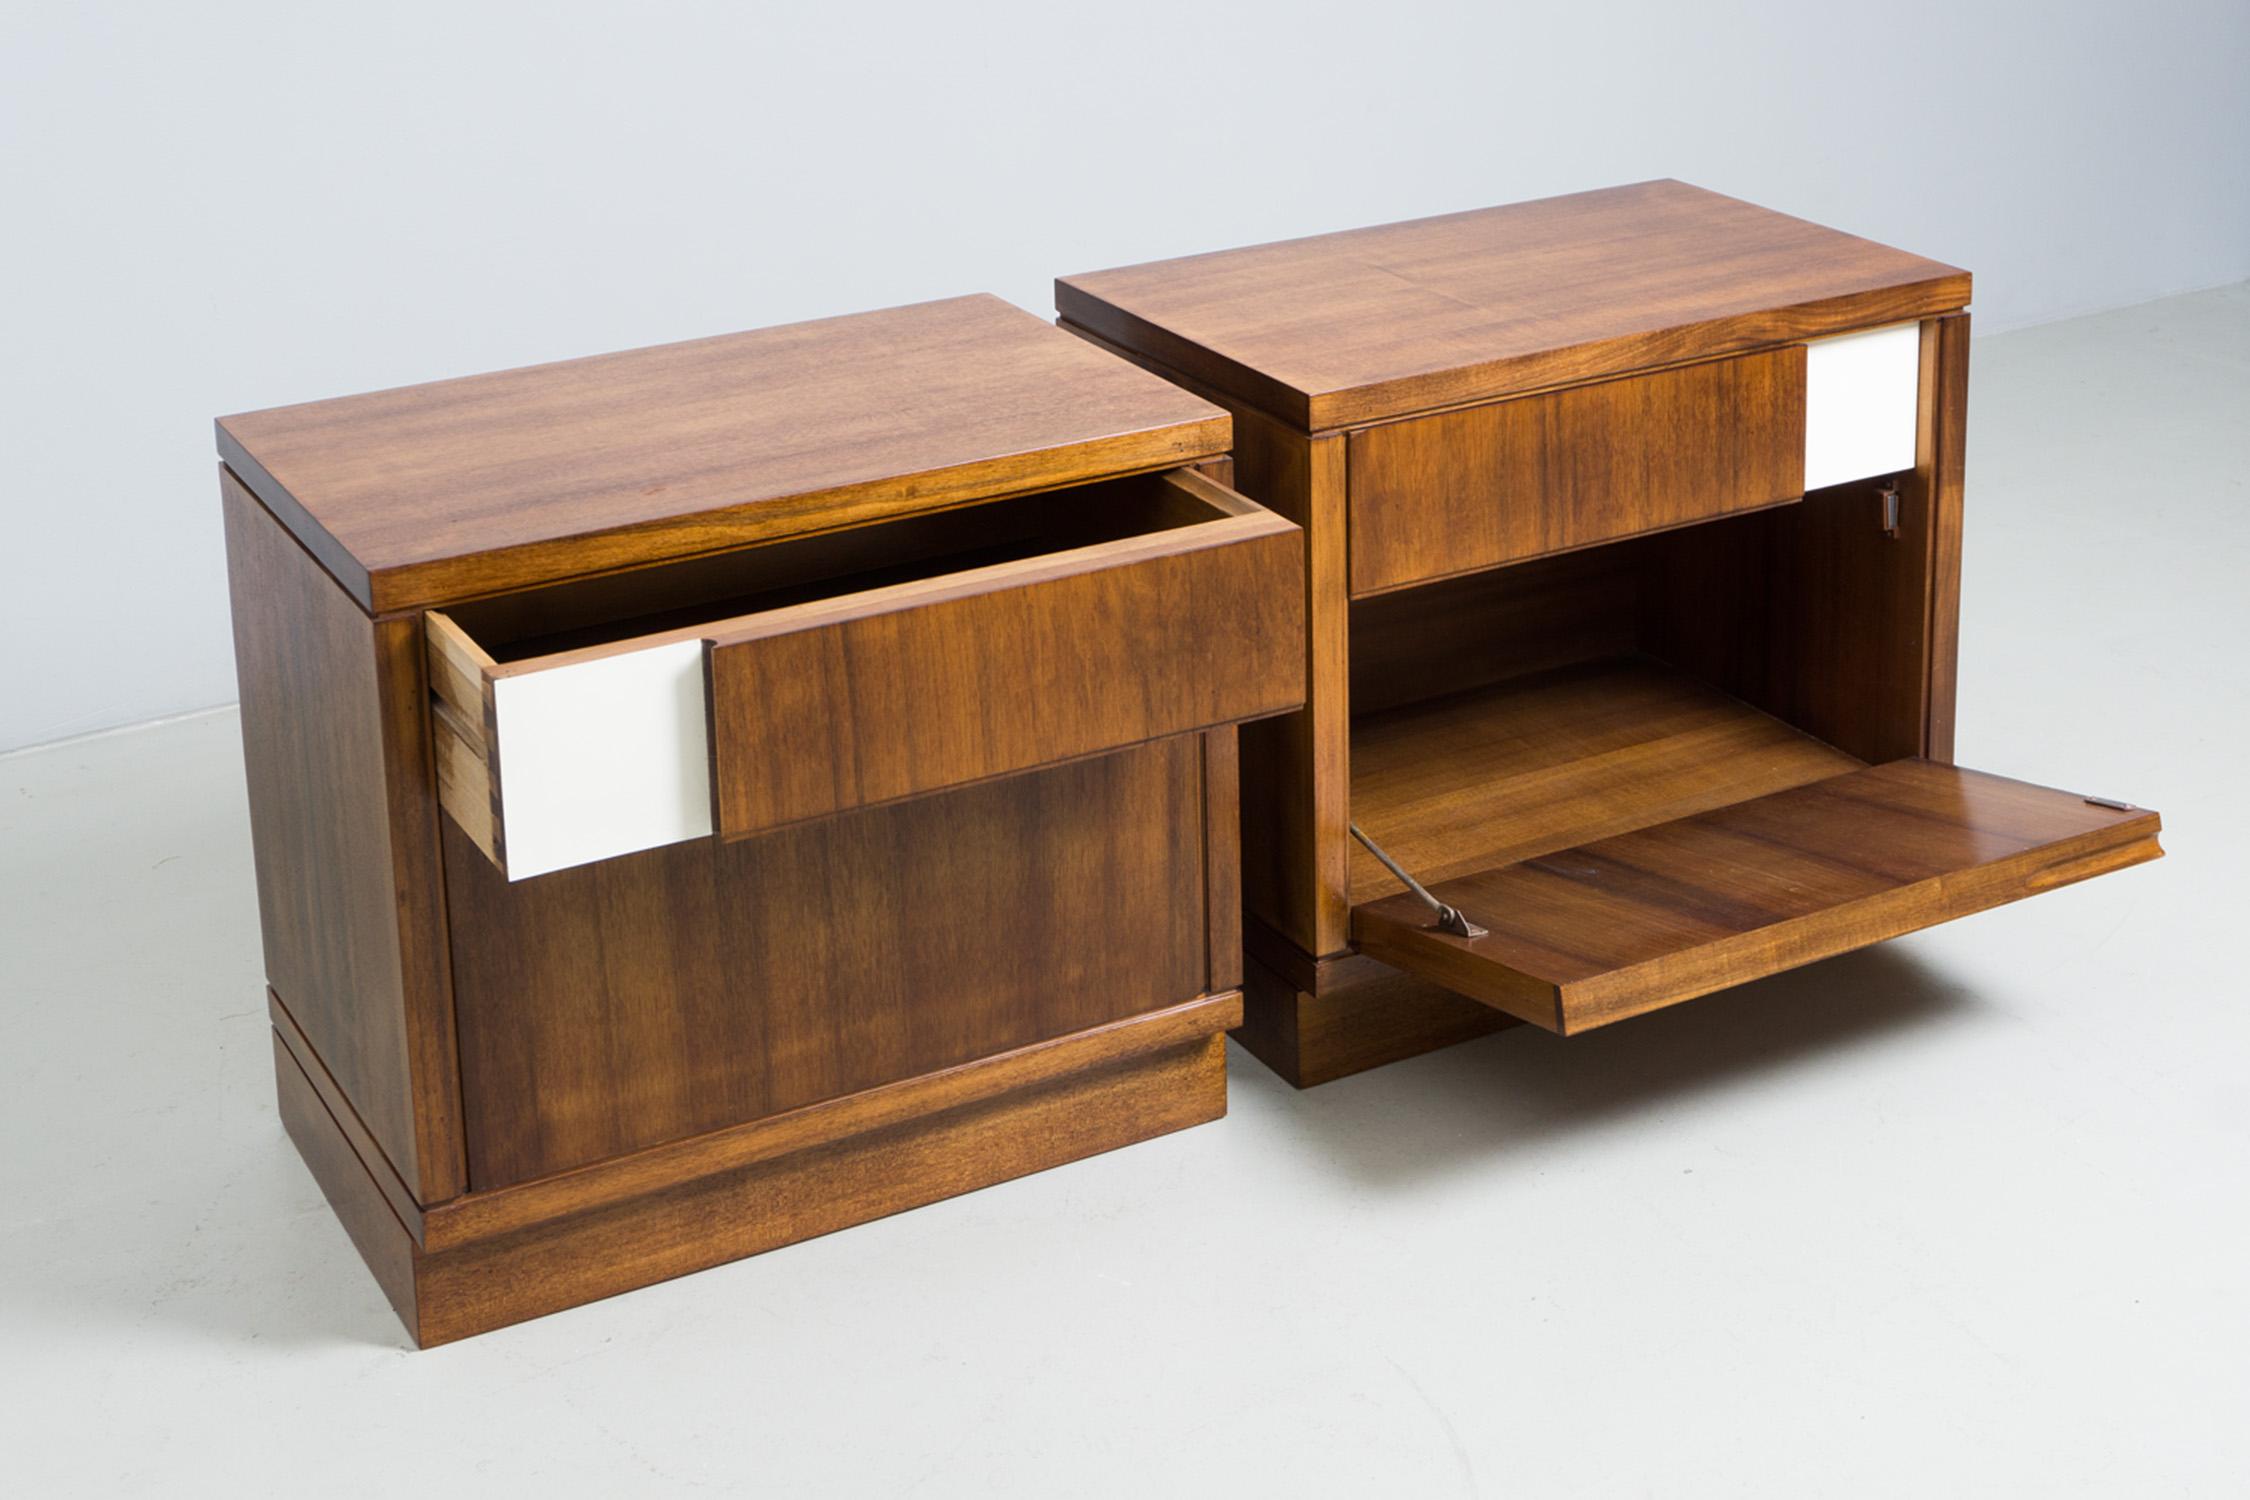 Two night stands made of wood and walnut veneer, with Formica elements in white. Drawer on top and lower compartment with fold out door. Designed by Ico Parisi. Manufactured by Brugnoli Mobili Cantú.